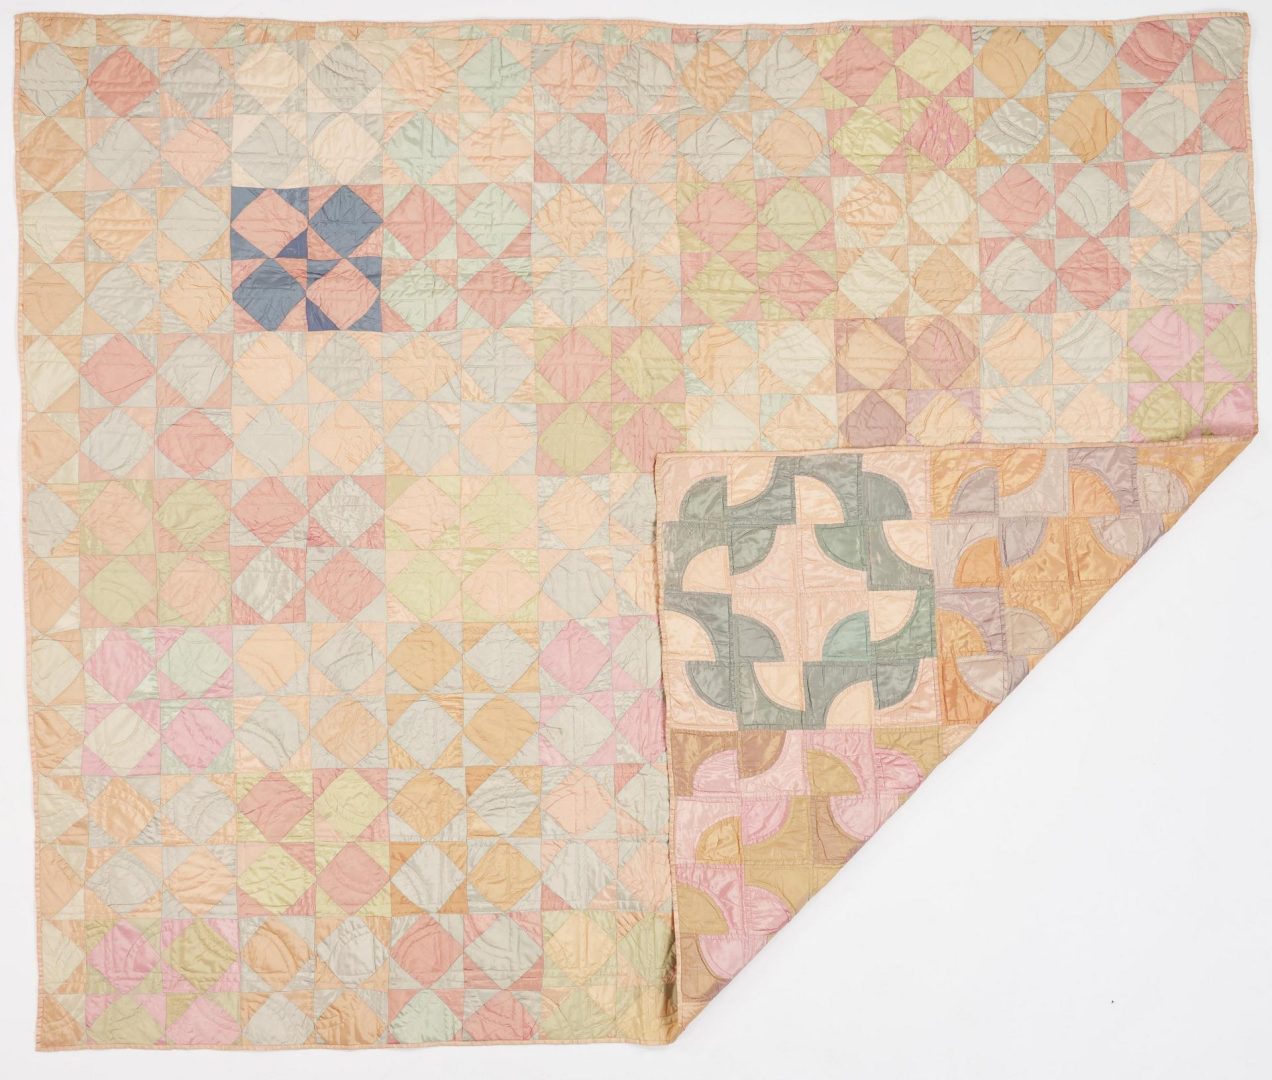 Lot 264: Double Sided Silk & Satin Quilt, Drunkard's Path & Square in a Square Patterns